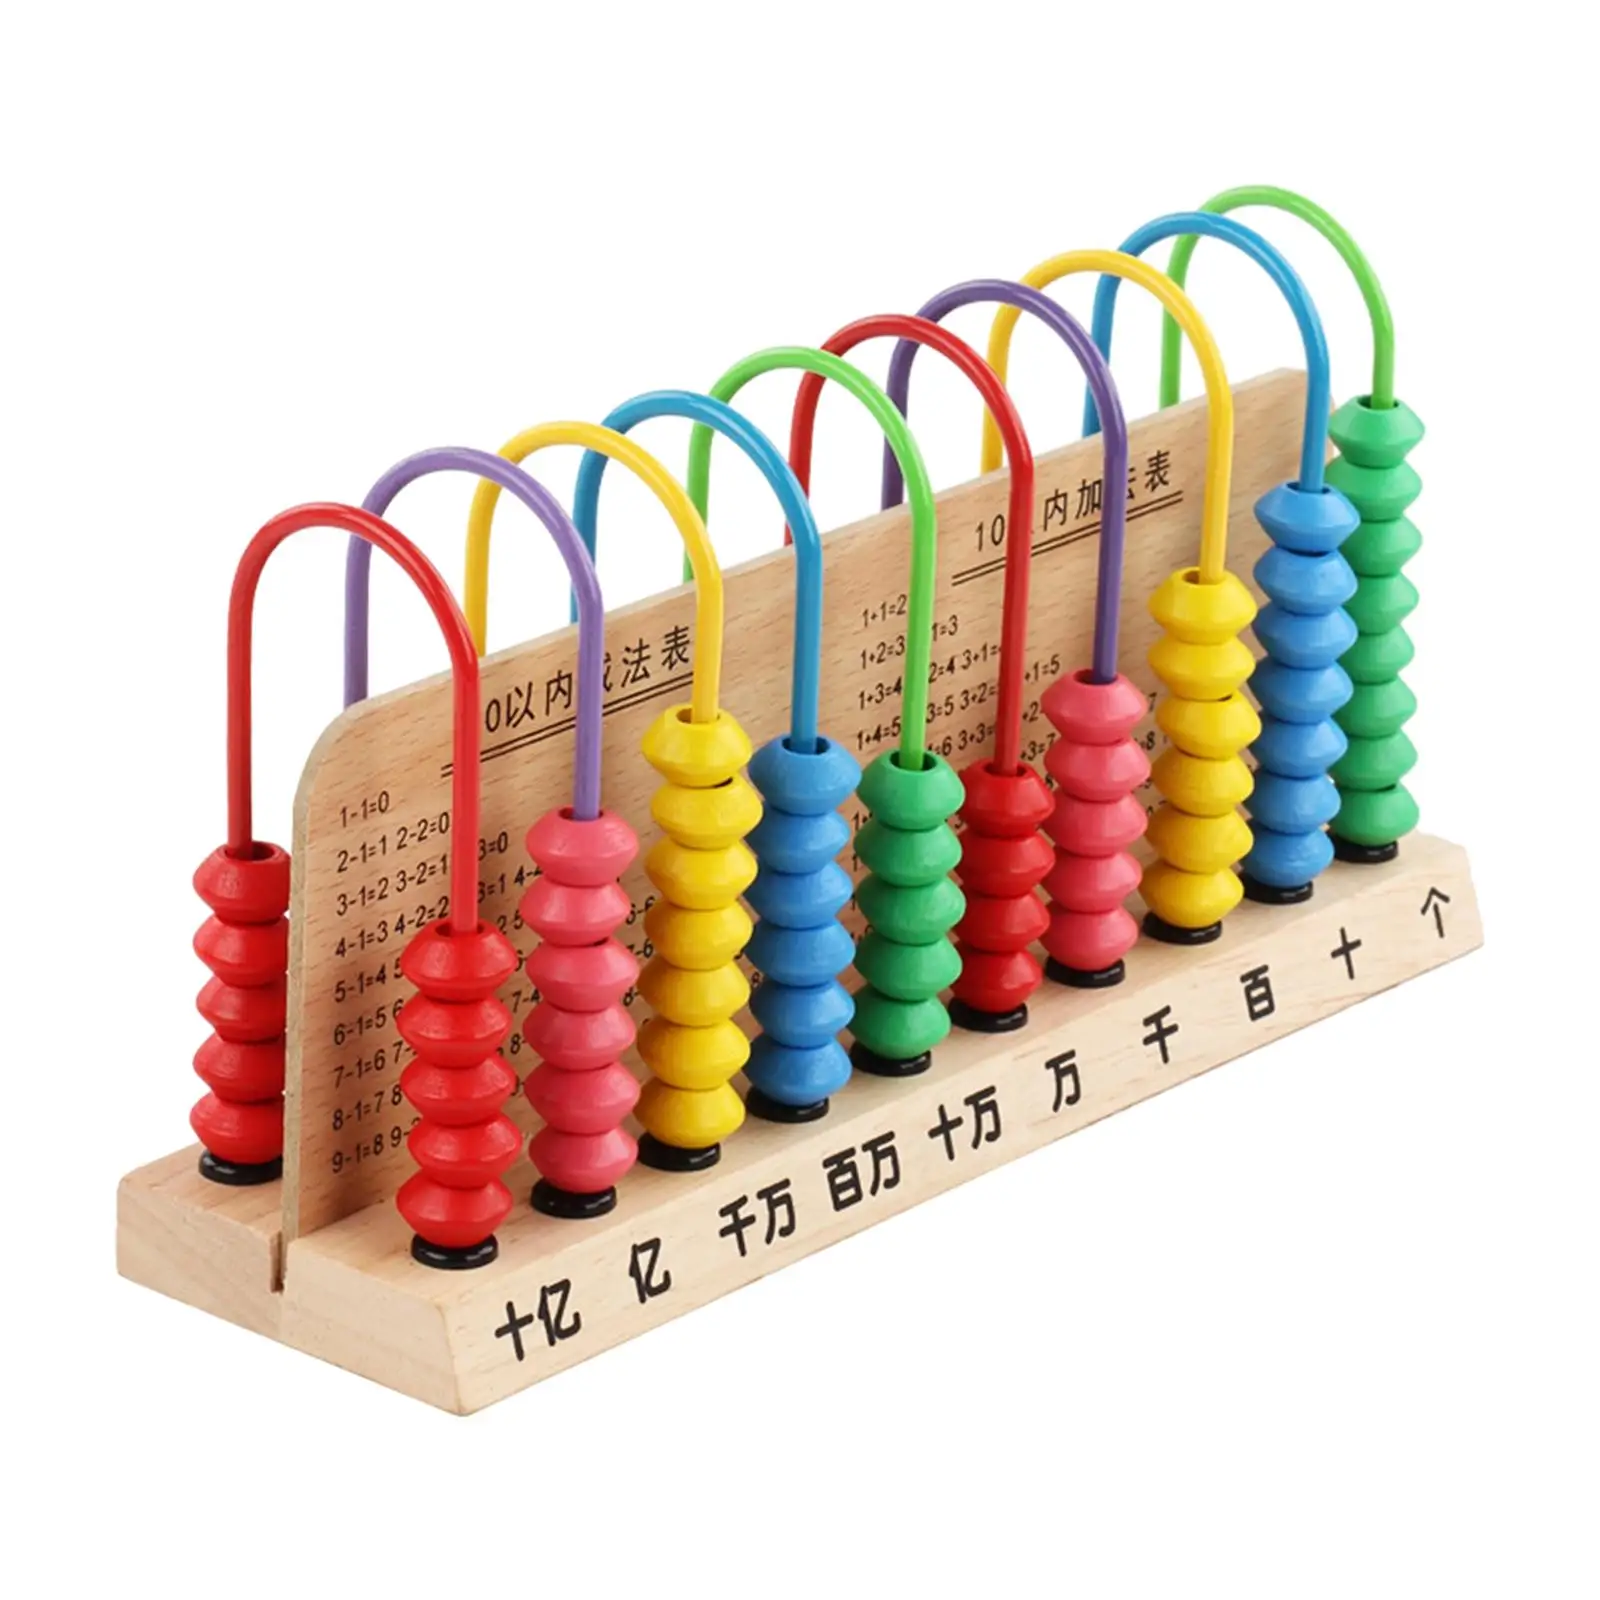 Add Subtract Abacus Classic Wooden Counting Toy for Baby Toddlers Kids